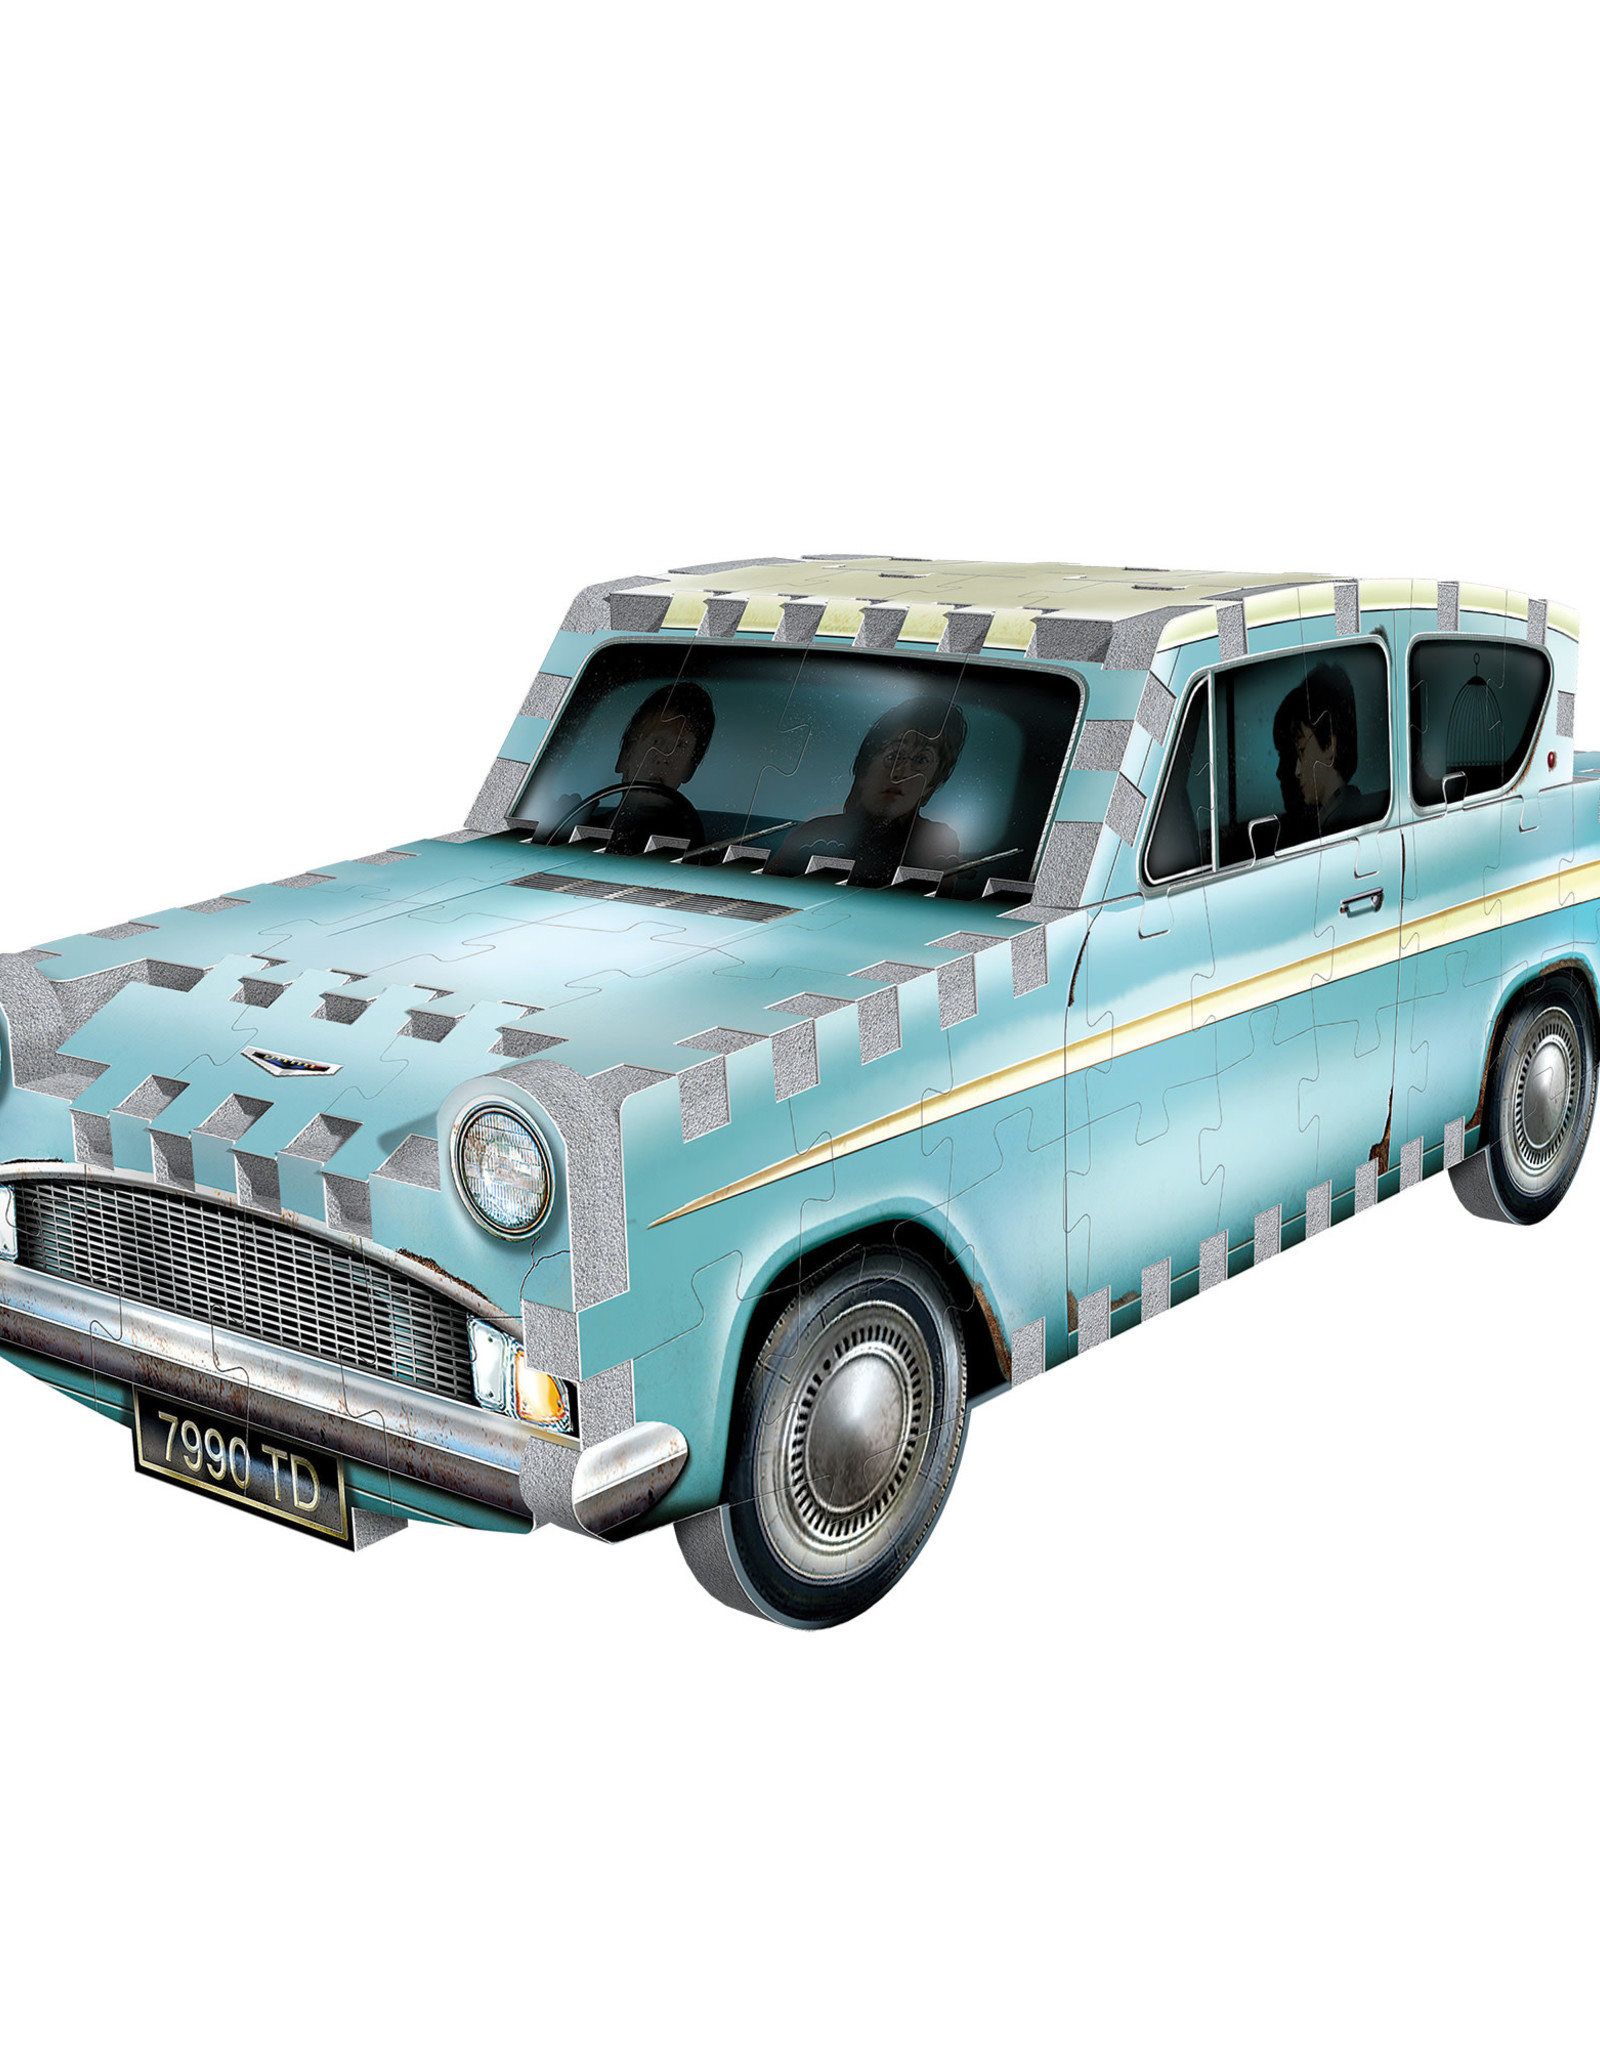 Wrebbit FLYING FORD ANGLIA